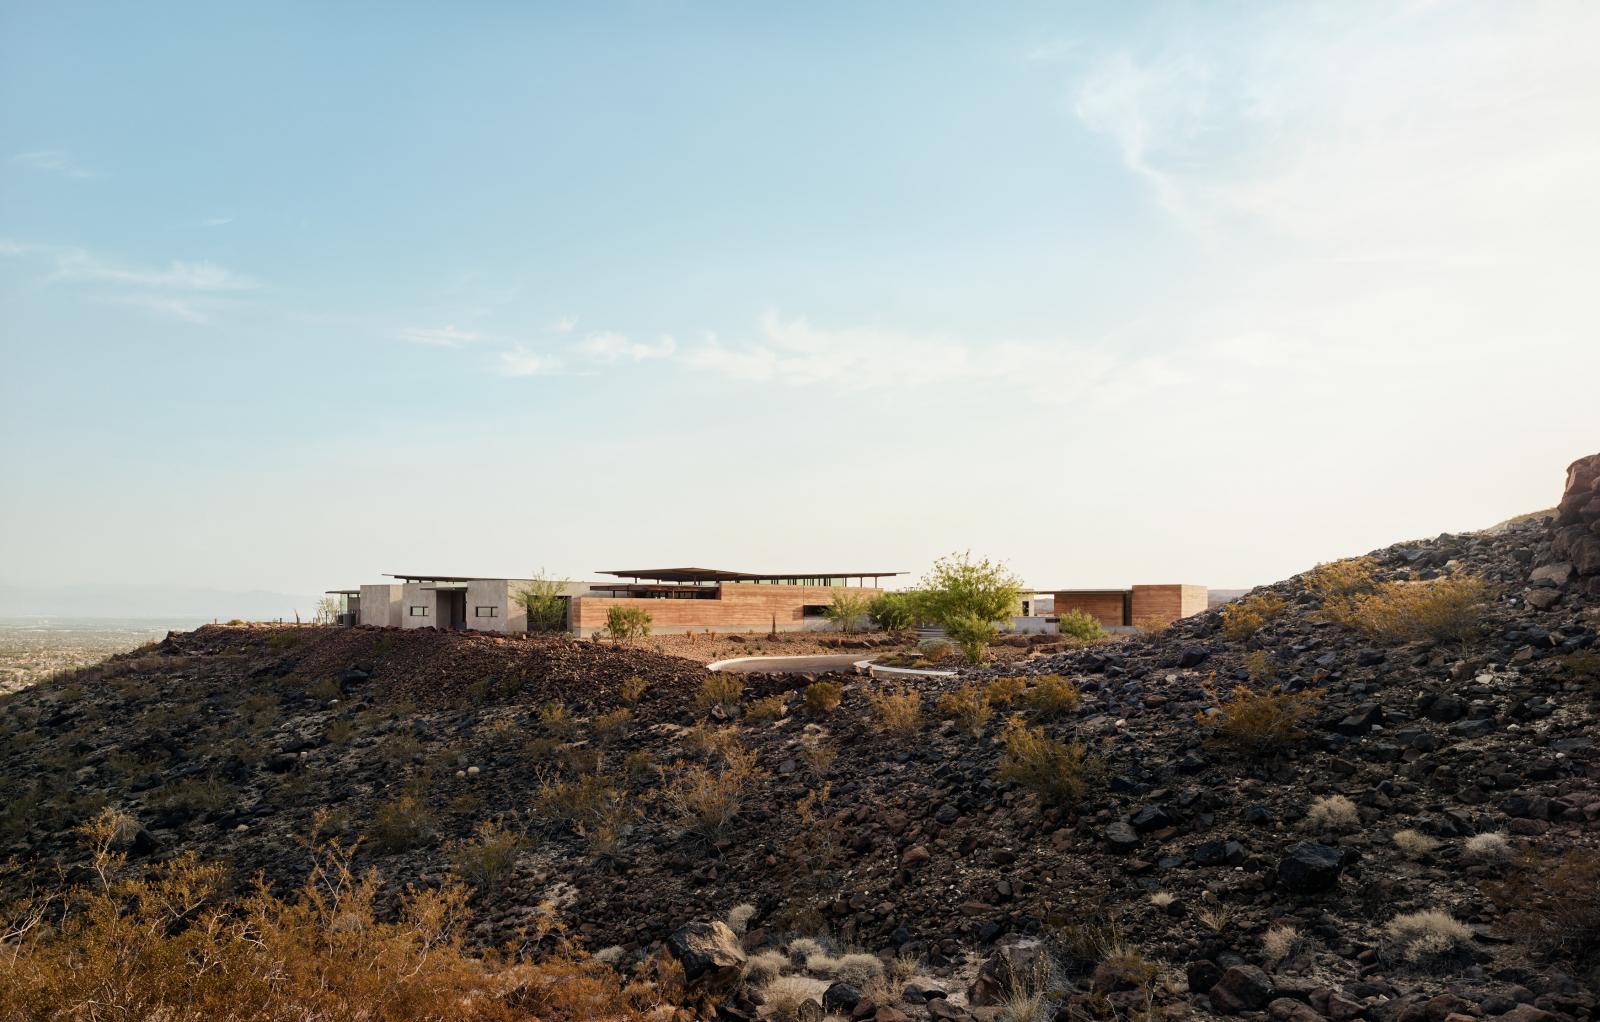 Horizon House uses rammed earth as the primary material which is designed to reflect the surrounding natural topography